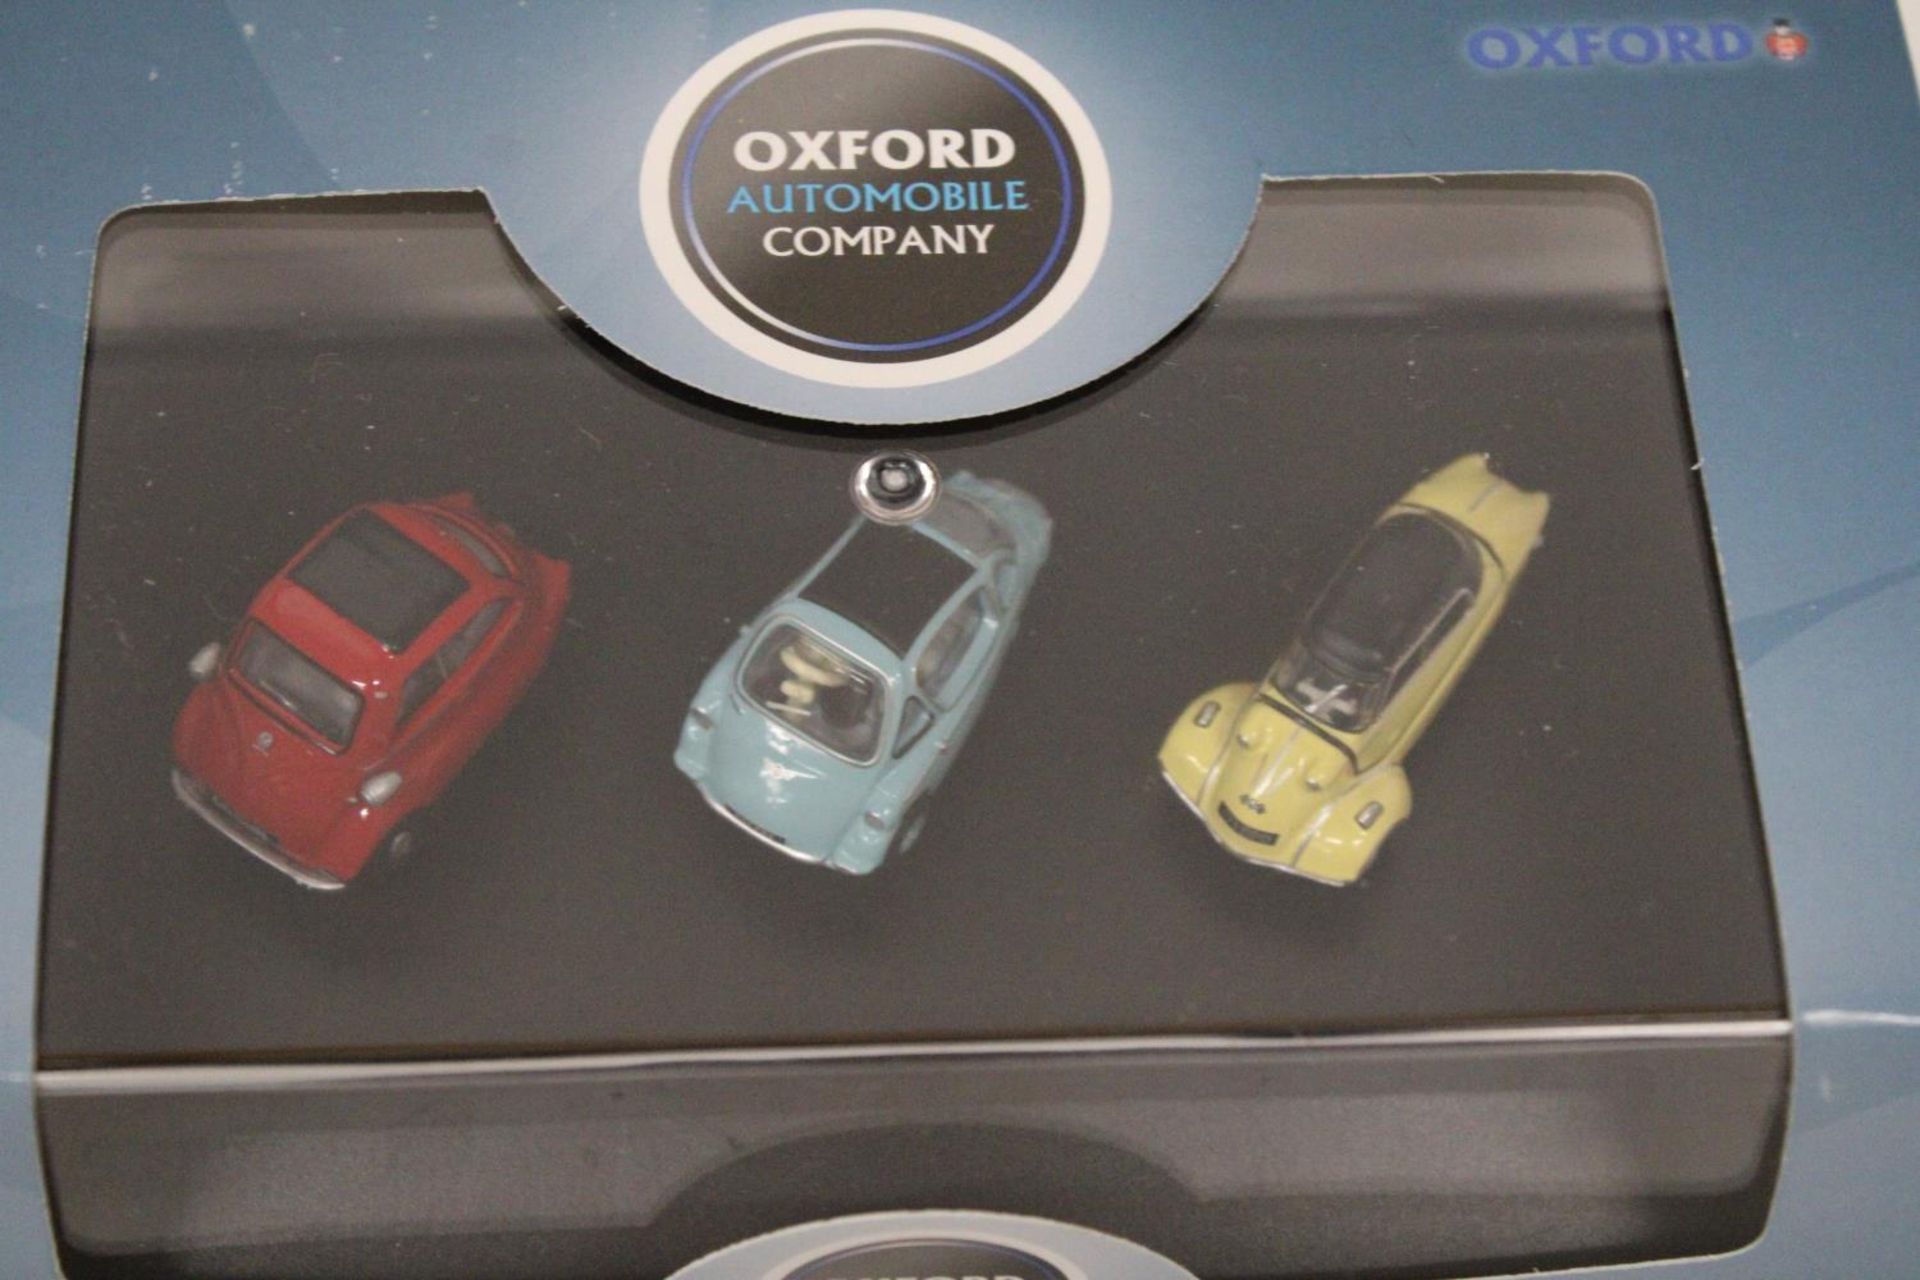 TWO OXFORD AS NEW AND BOXED AUTOMOBILE COMPANY SETS TO INCLUDE A FIVE PIECE MG SET AND A THREE PIECE - Image 4 of 8